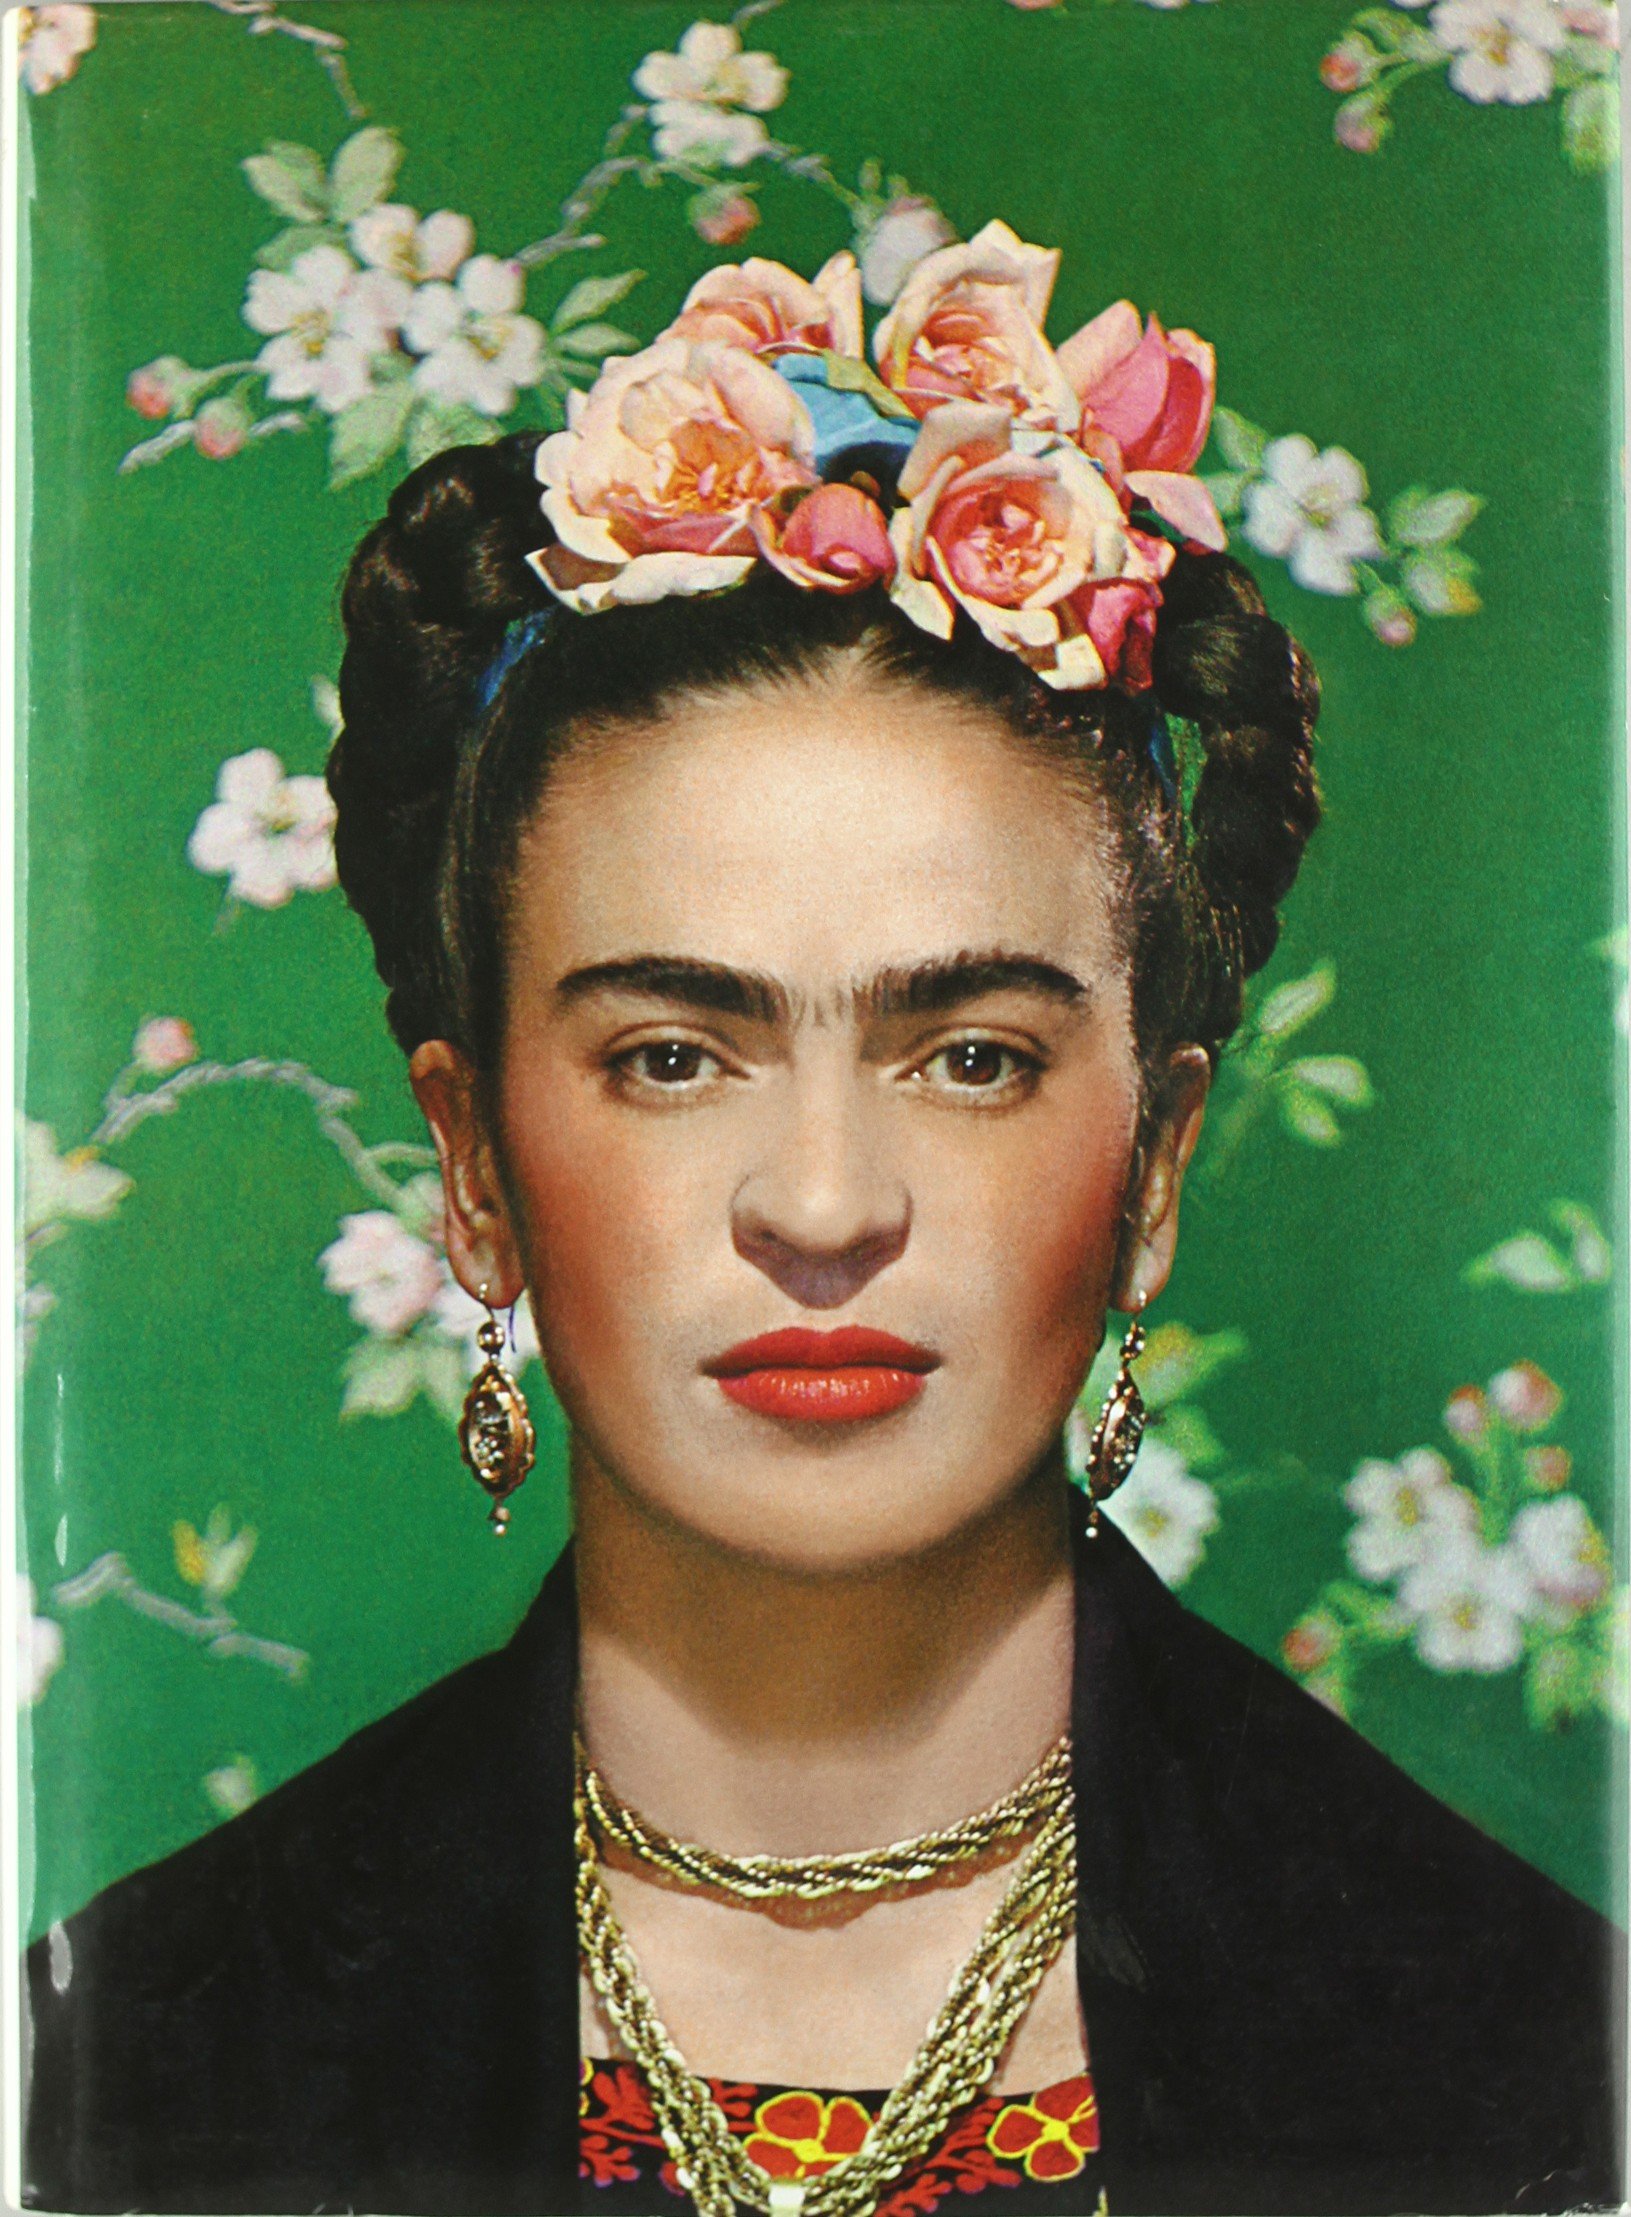 Frida Kahlo with her iconic hairstyle